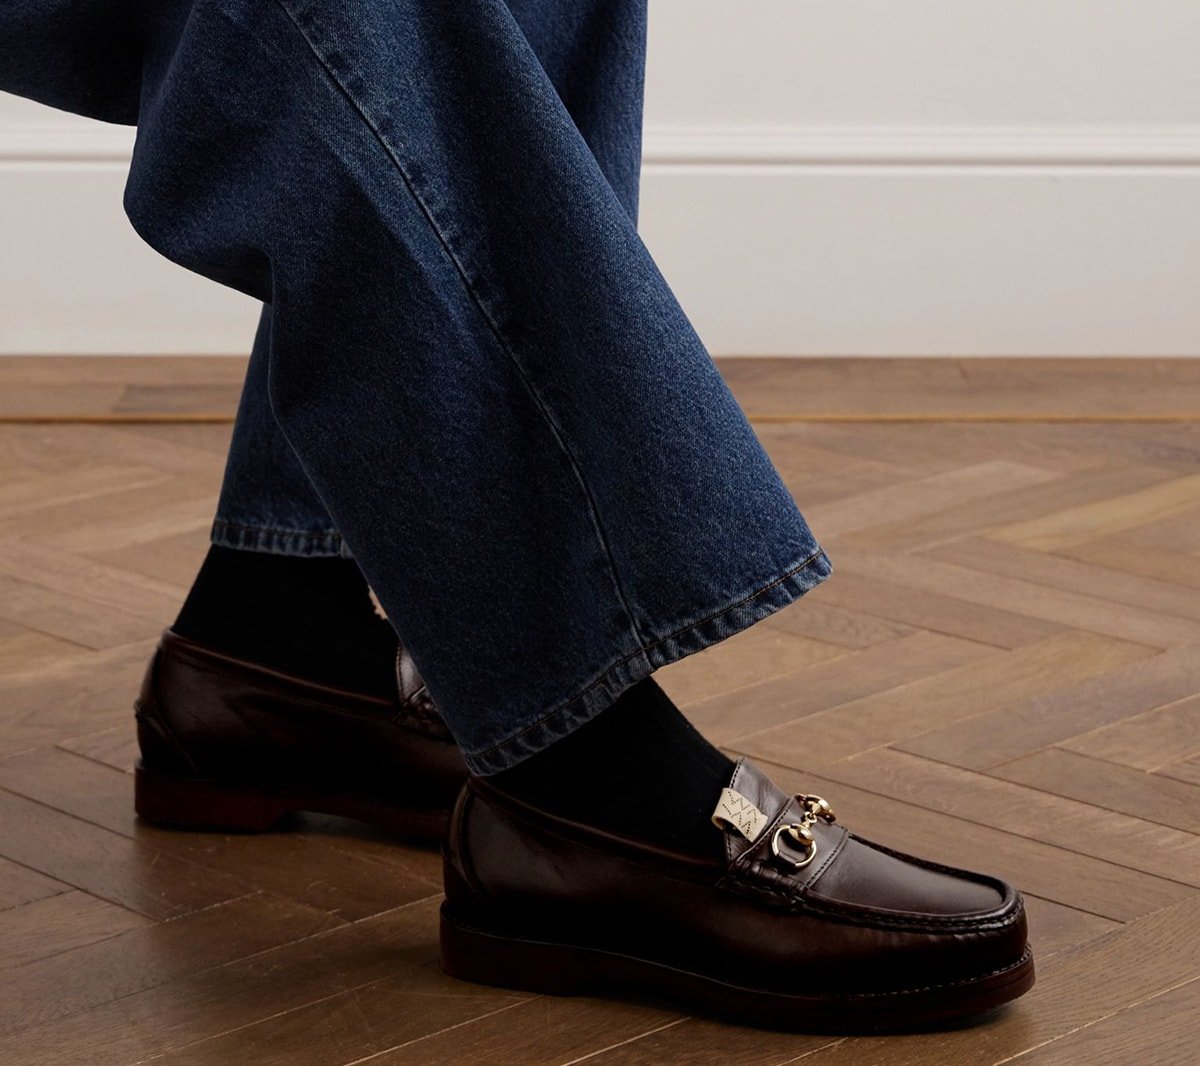 Consider comfort when selecting the appropriate dress shoes for day to night wear